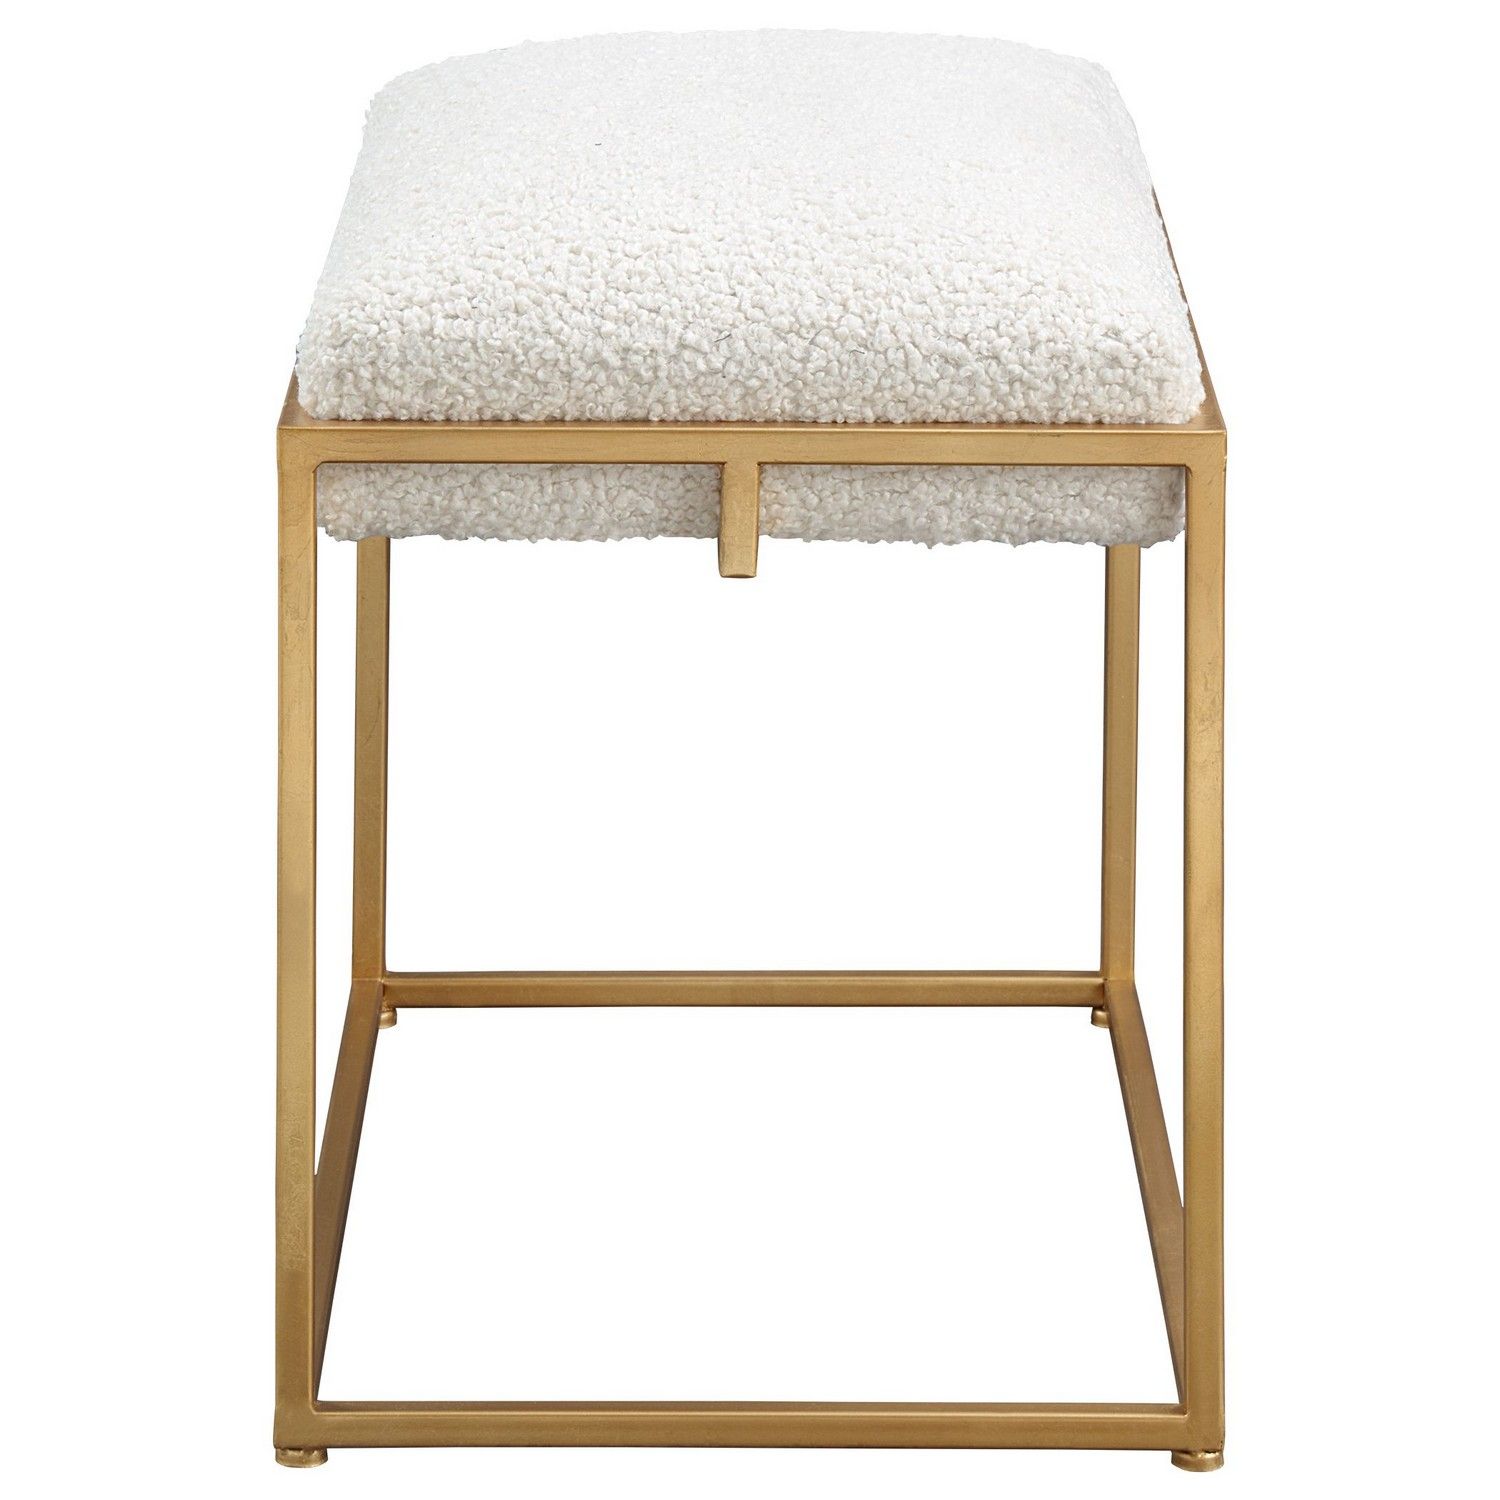 Uttermost Paradox Small Shearling Bench - Gold/White